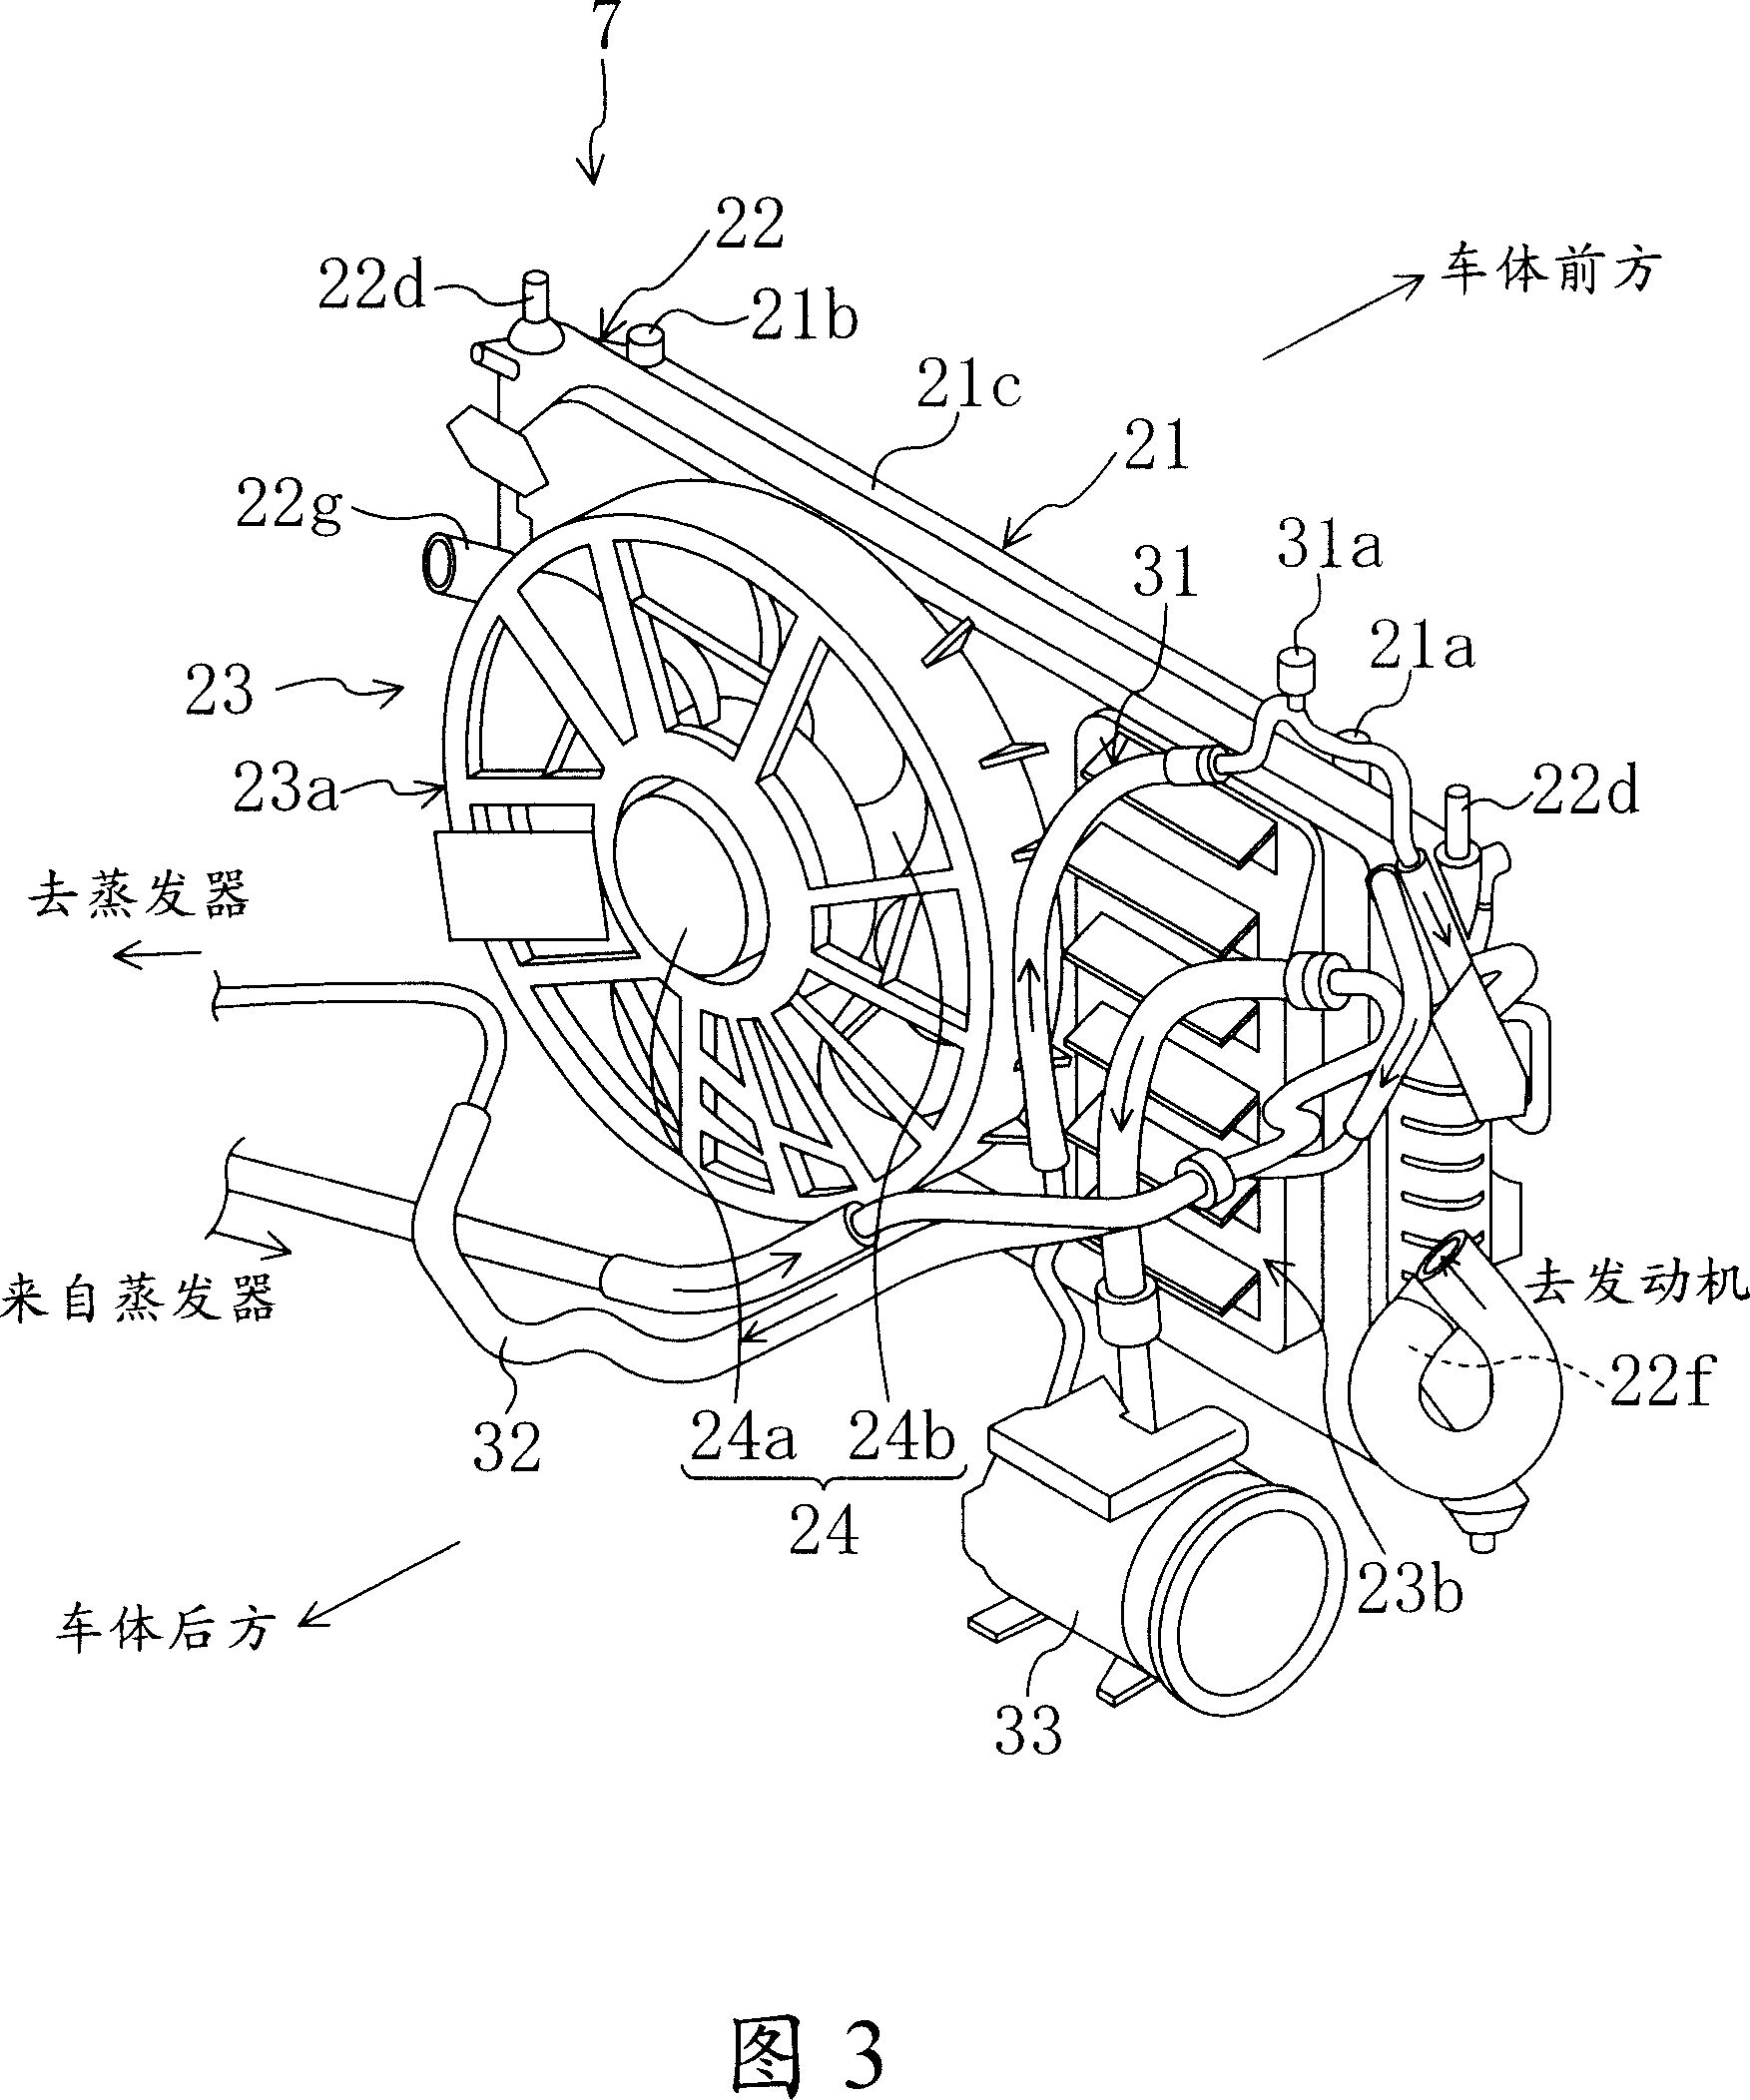 Cooling device of a vehicle